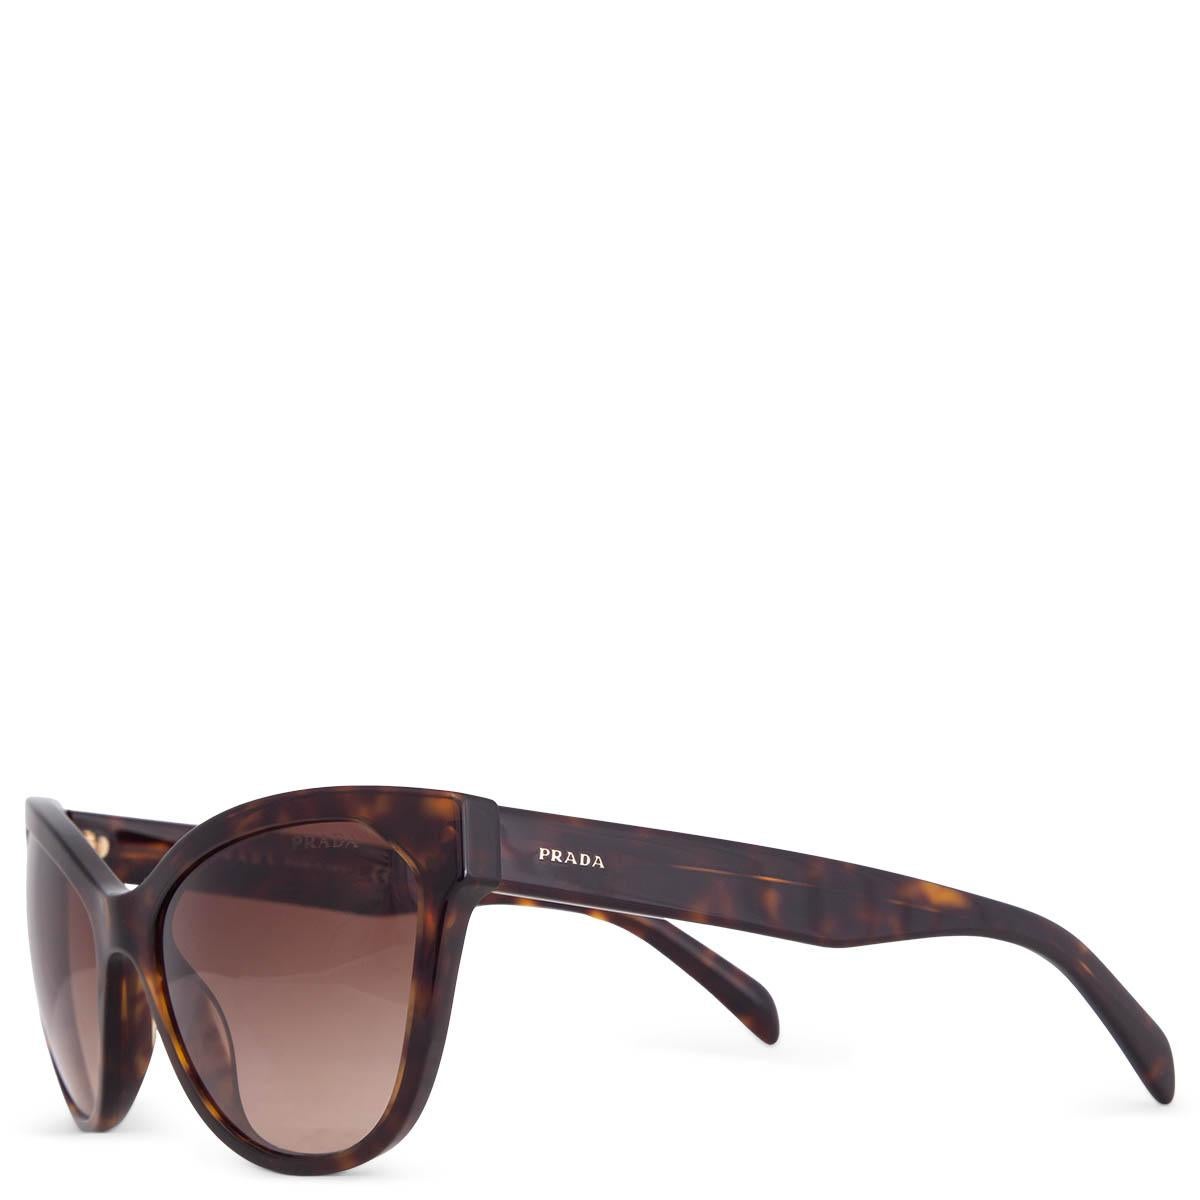 100% authentic Prada SPR 15V cat-eye sunglasses in brown tortoiseshell acetate and brown gradient lenses. Have been worn and are in excellent condition. Come with case. 

Measurements
Model	SPR 15V
Width	14cm (5.5in)
Height	5cm (2in)

All our